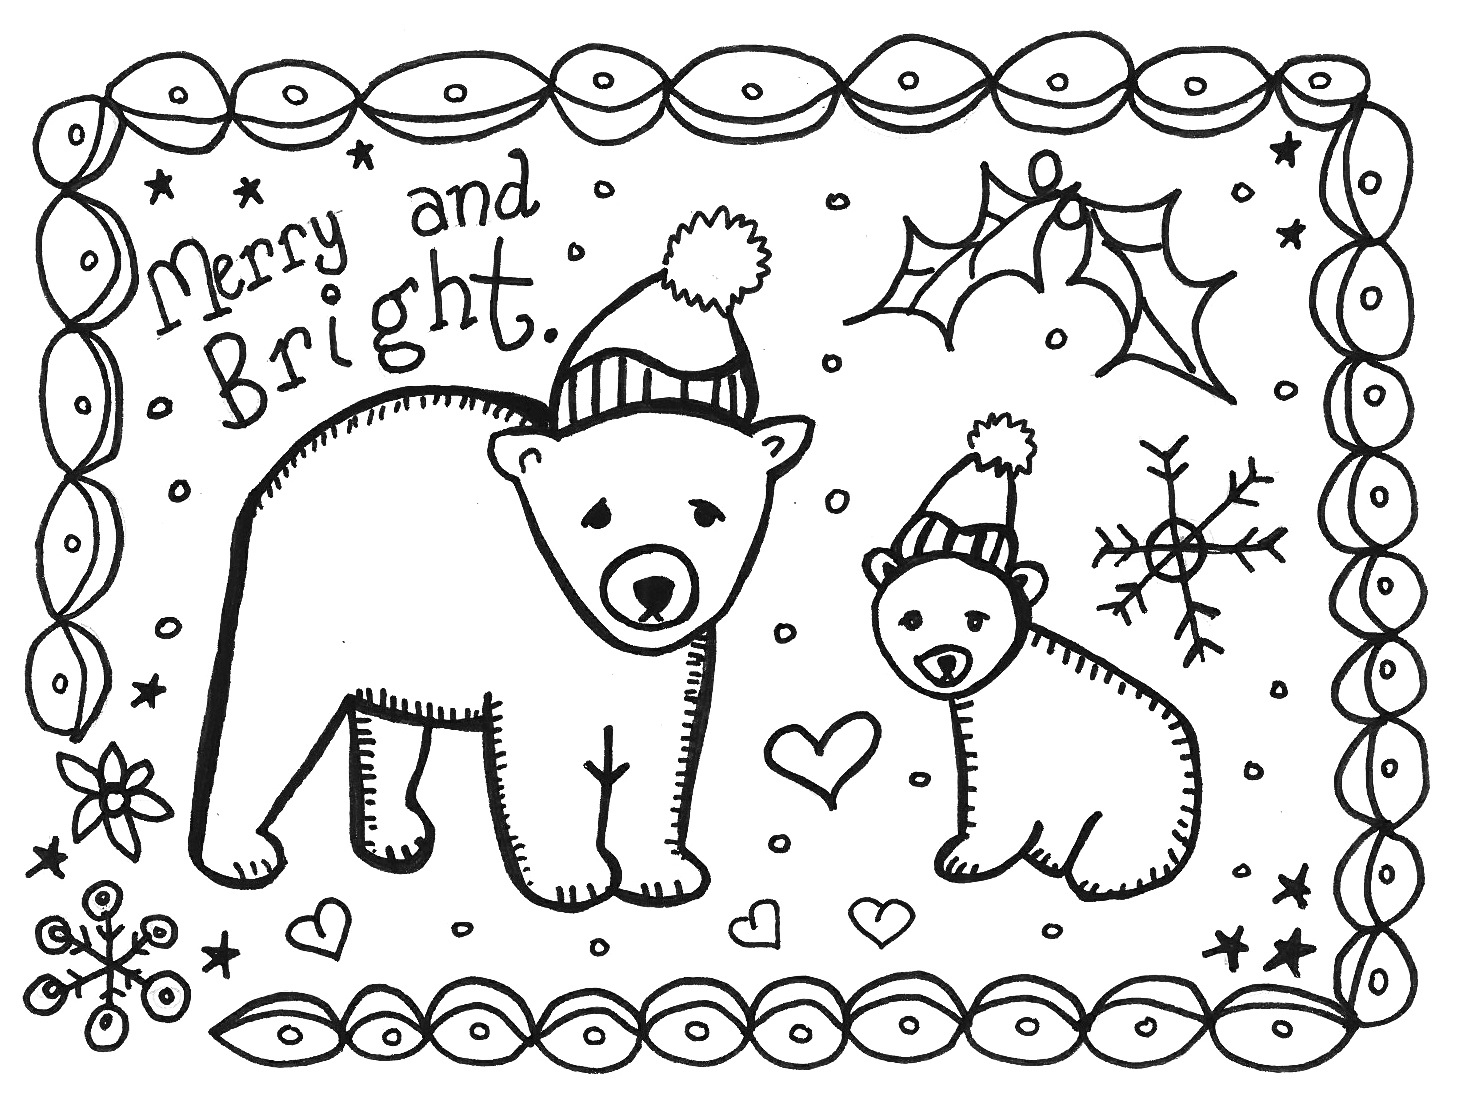 Print And Color This Card To Give - Marcia Beckett - Make A Holiday Card For Free Printable